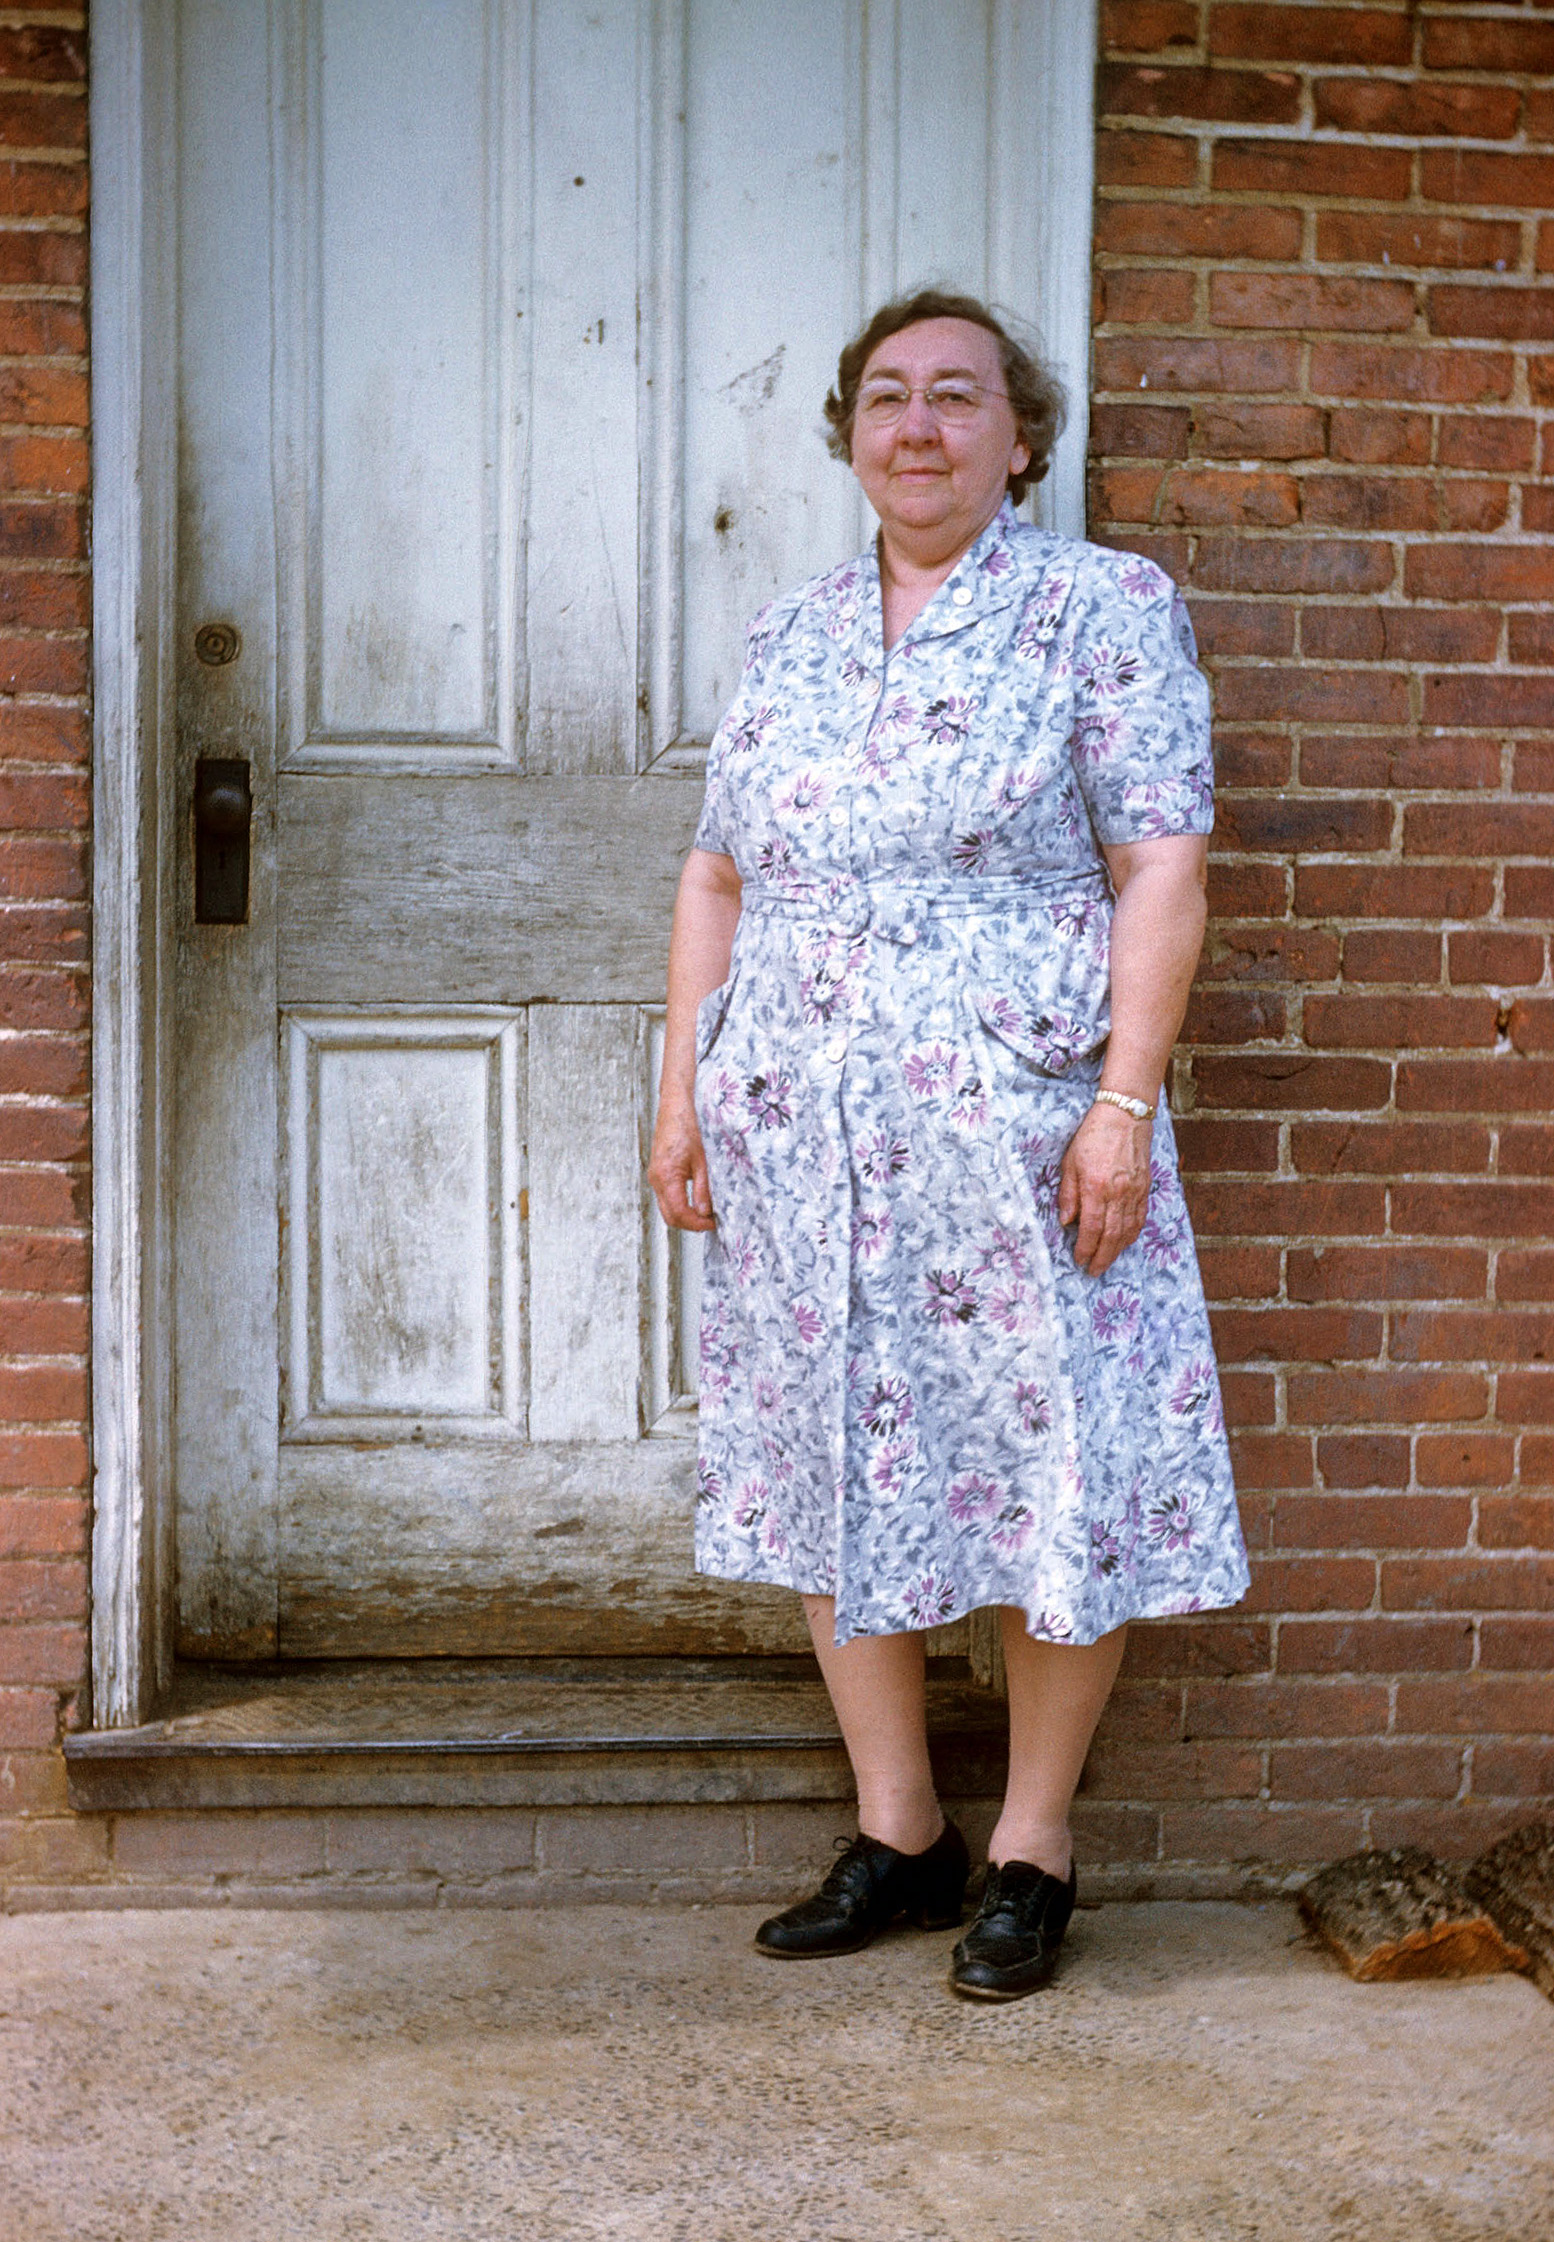 Old Mrs. Lawson ran the show at the one-room school in Honey Grove, Pennsylvania and she was my mother's inspiration to become a teacher. My grandfather photographed her by the schoolhouse door in 1958 on the school's last-ever day of class. The new consolidated elementary school opened the following fall. View full size.